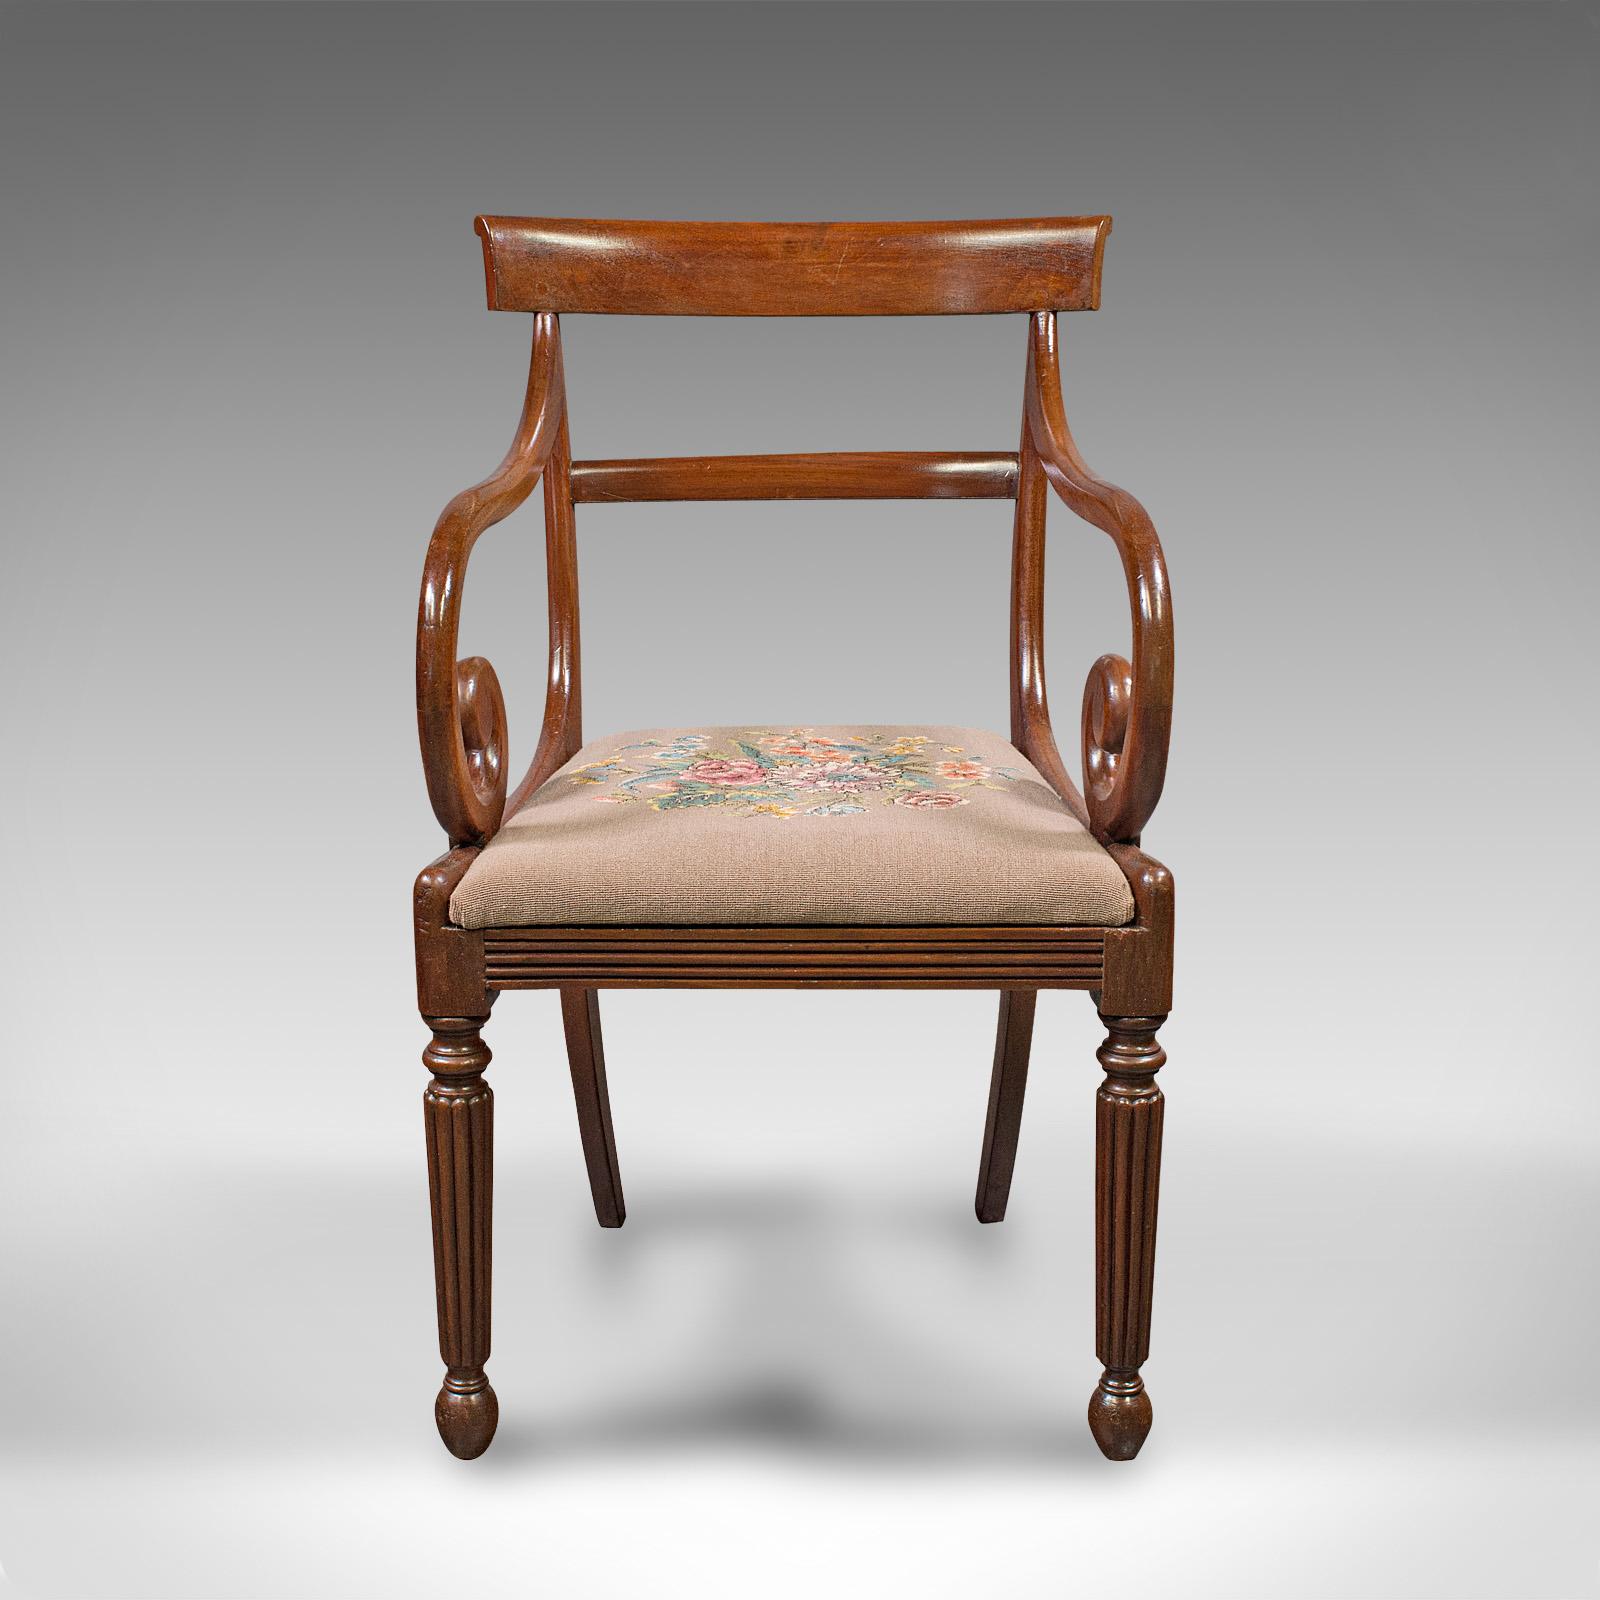 This is an antique elbow chair. An English, mahogany armchair with needlepoint upholstery, dating to the Georgian period, circa 1800.

Serpentine forms with fine colour and finish
Displays a desirable aged patina and in good order
Select stocks